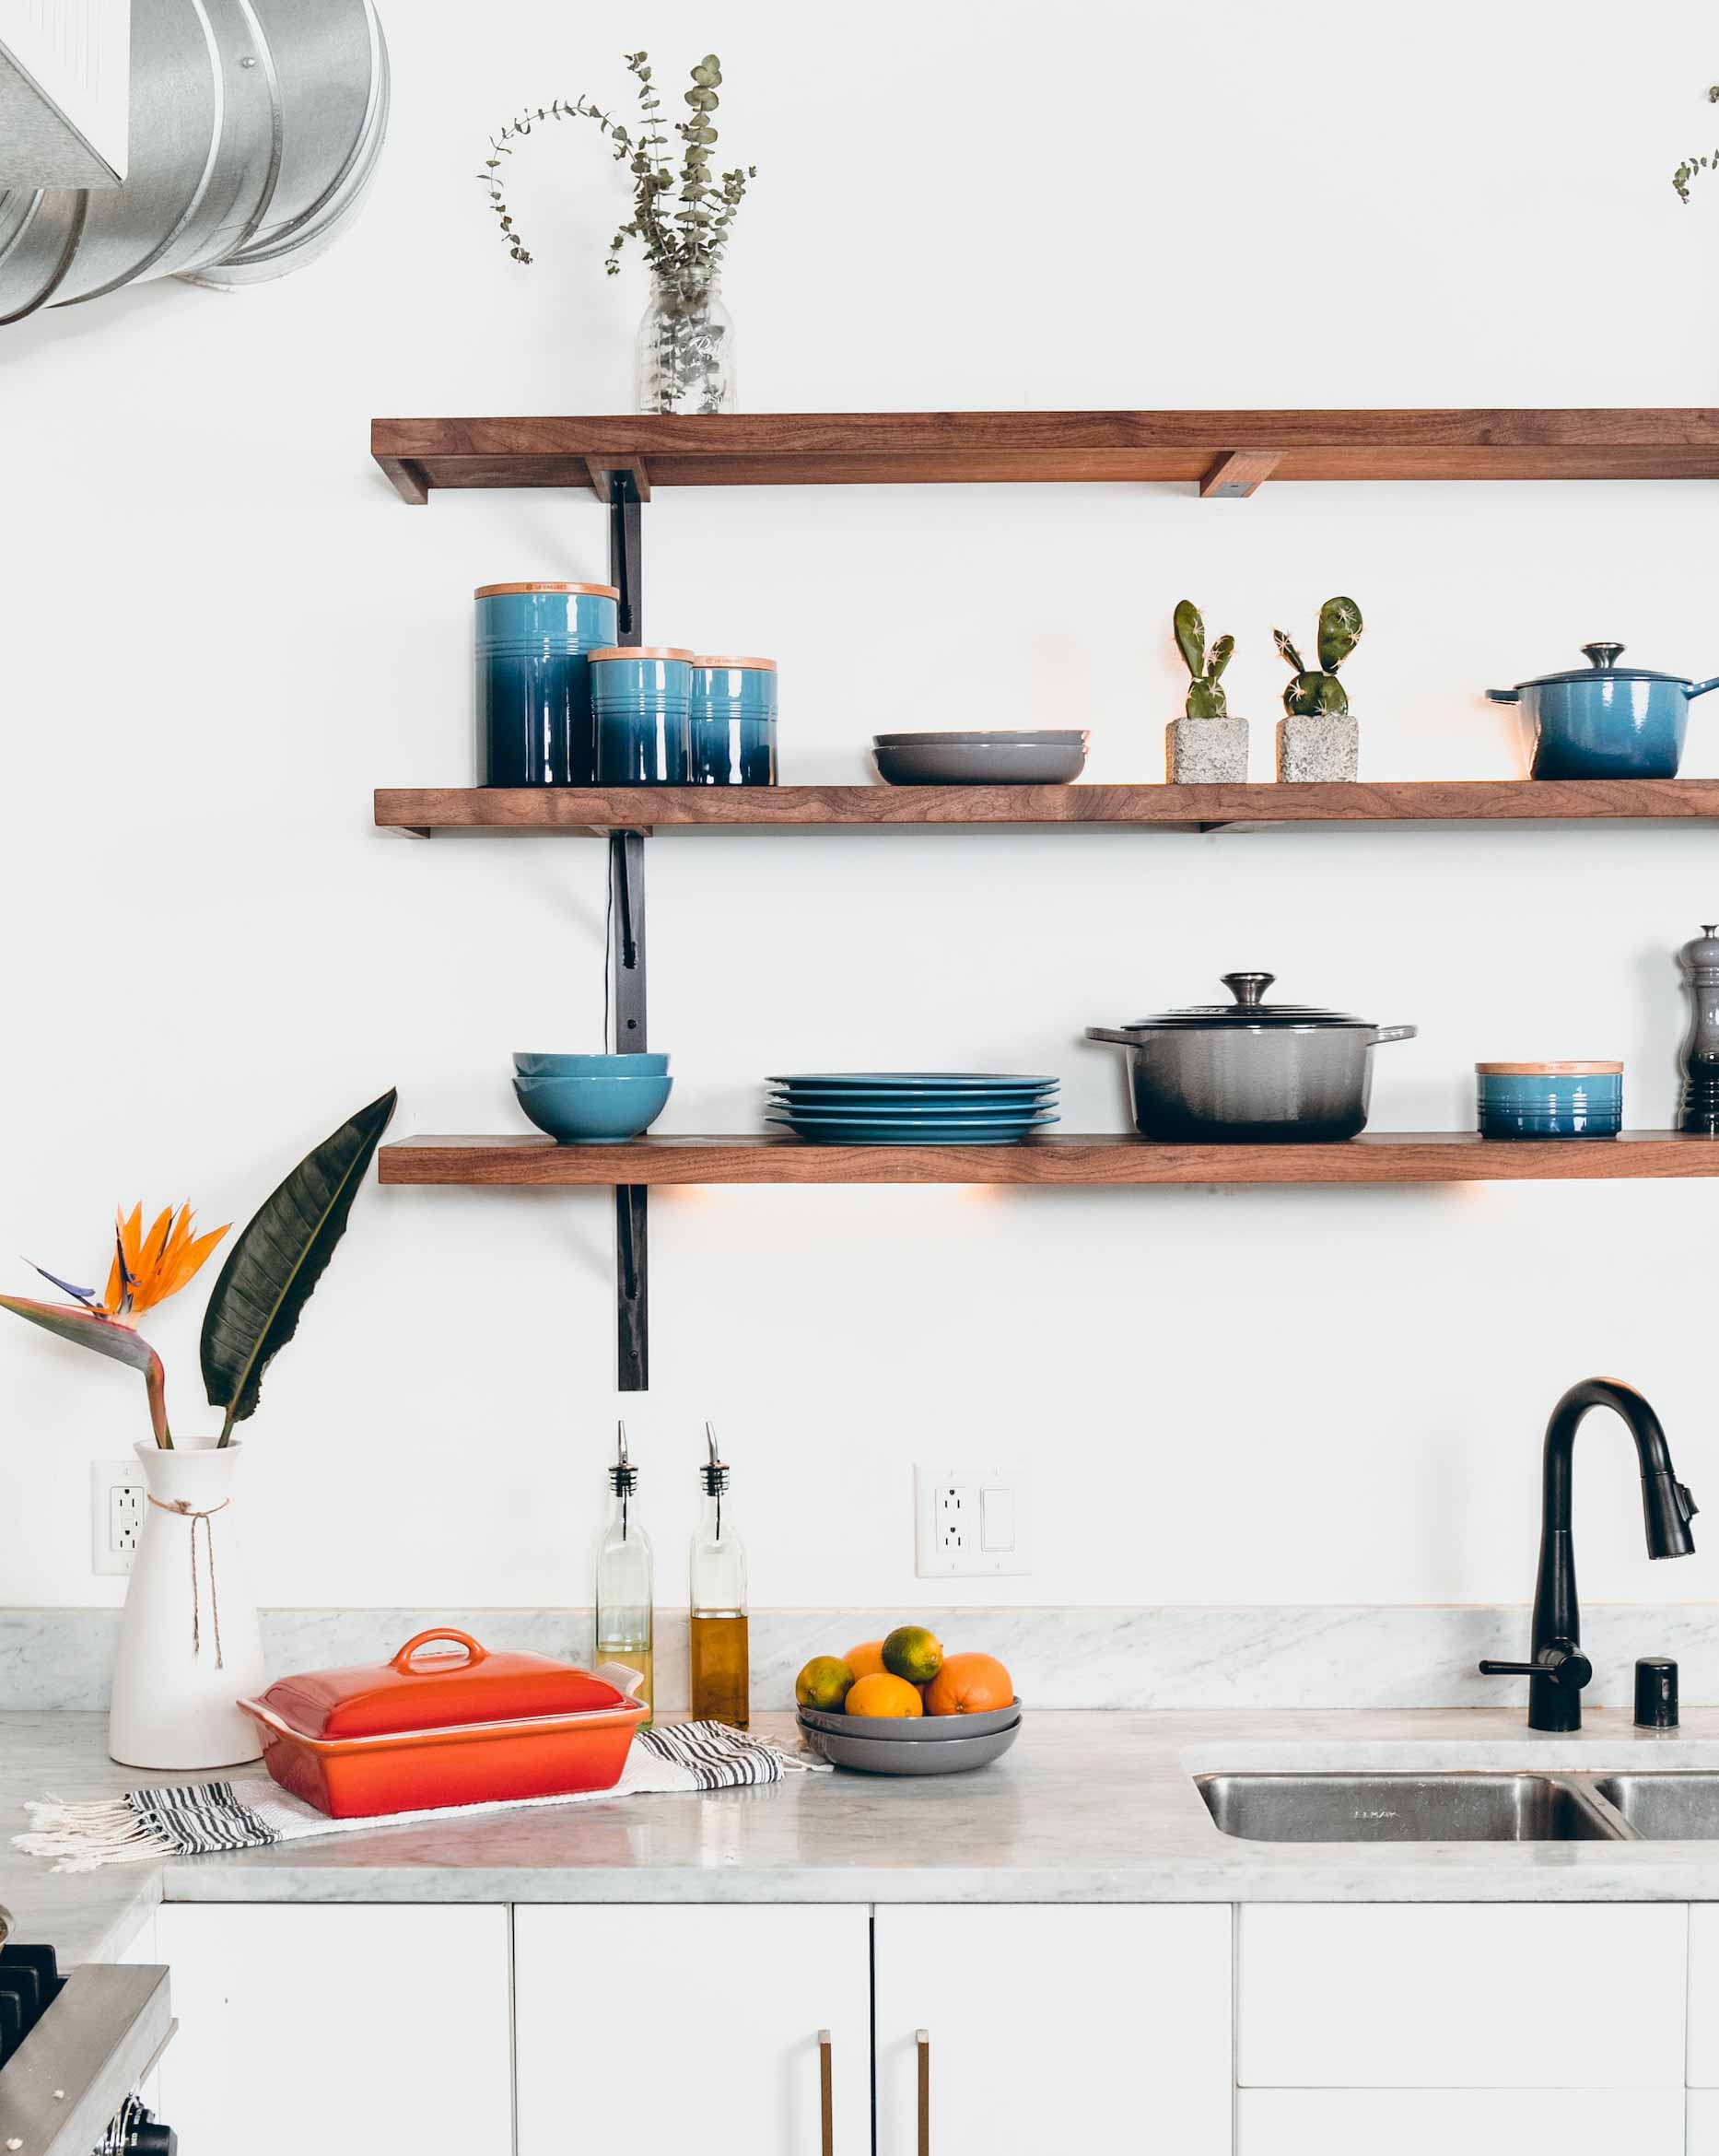 White kitchen with wooden shelves, dishes and plants